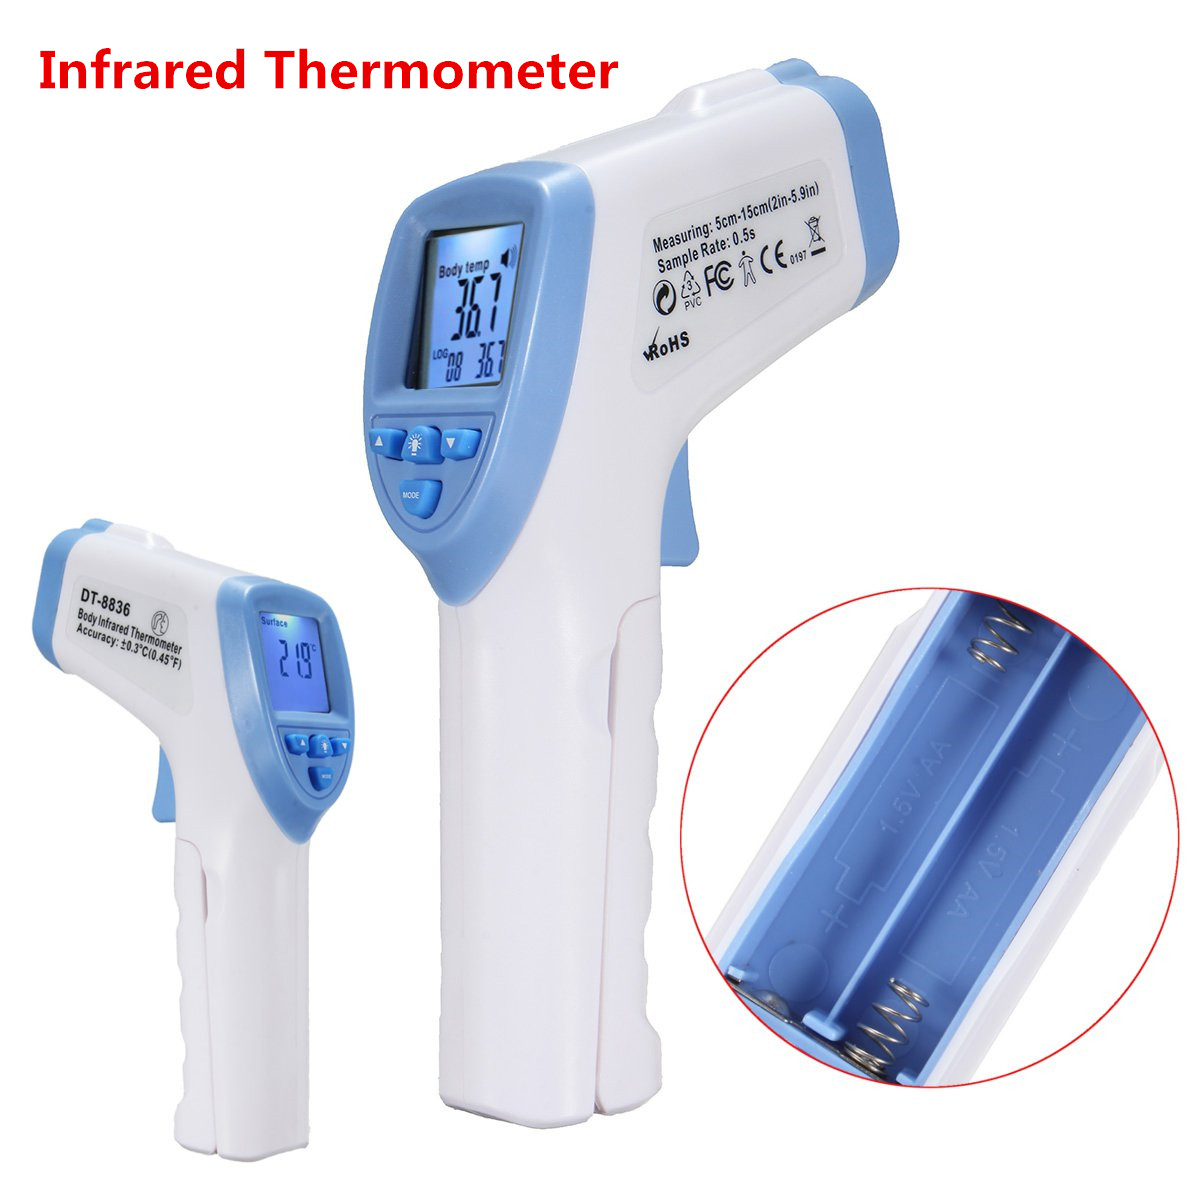 Digital-Non-Contact-No-Touch-Infrared-Forehead-Thermometer-DigitalThermometer-Measuring-Range-32-425-1132170-2